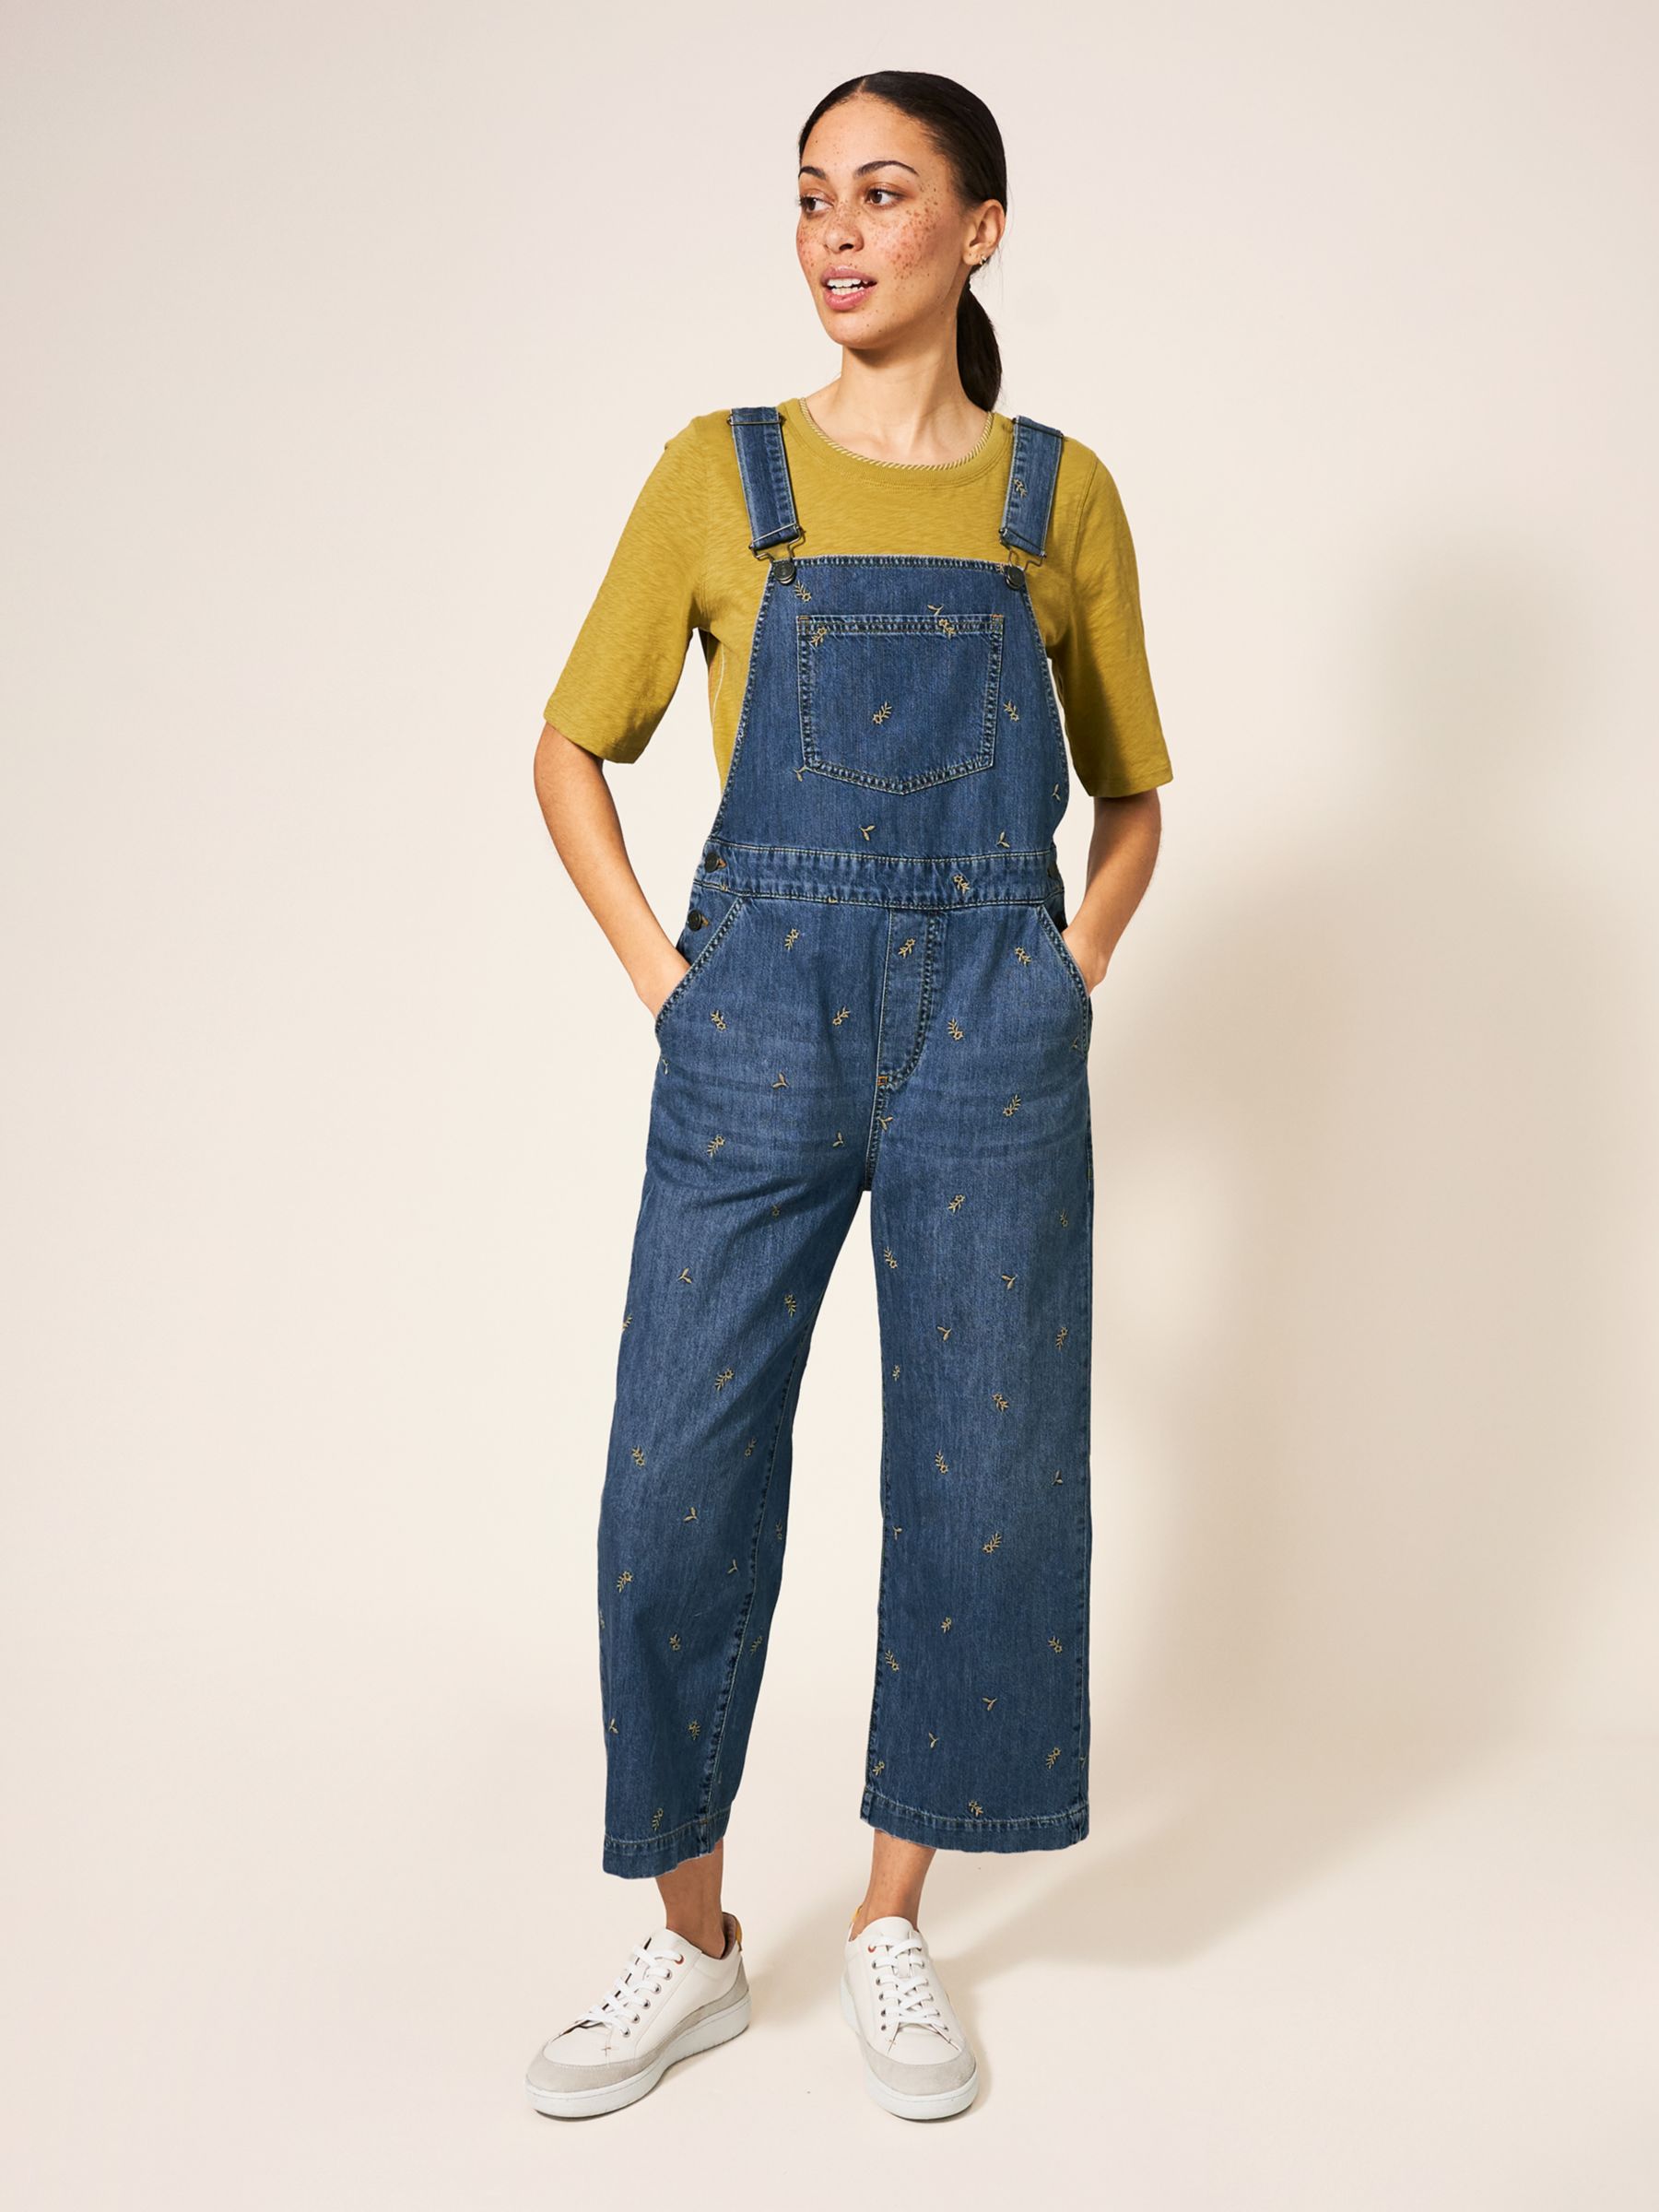 White Stuff Viola Linen Cropped Dungarees, Chambray Blue at John Lewis &  Partners